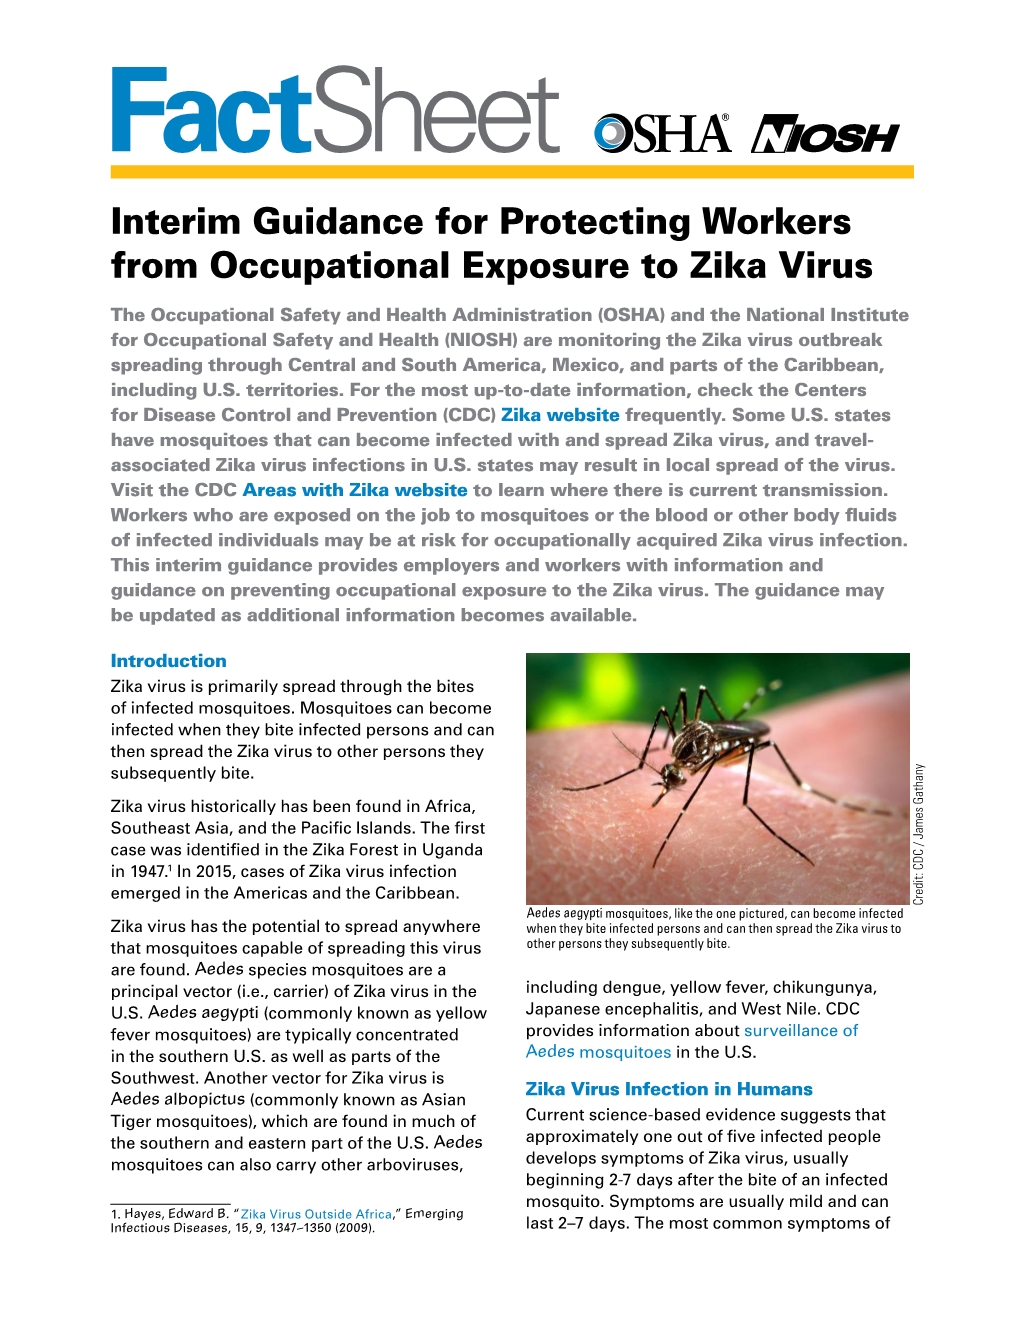 Protecting Workers from Occupational Exposure to Zika Virus